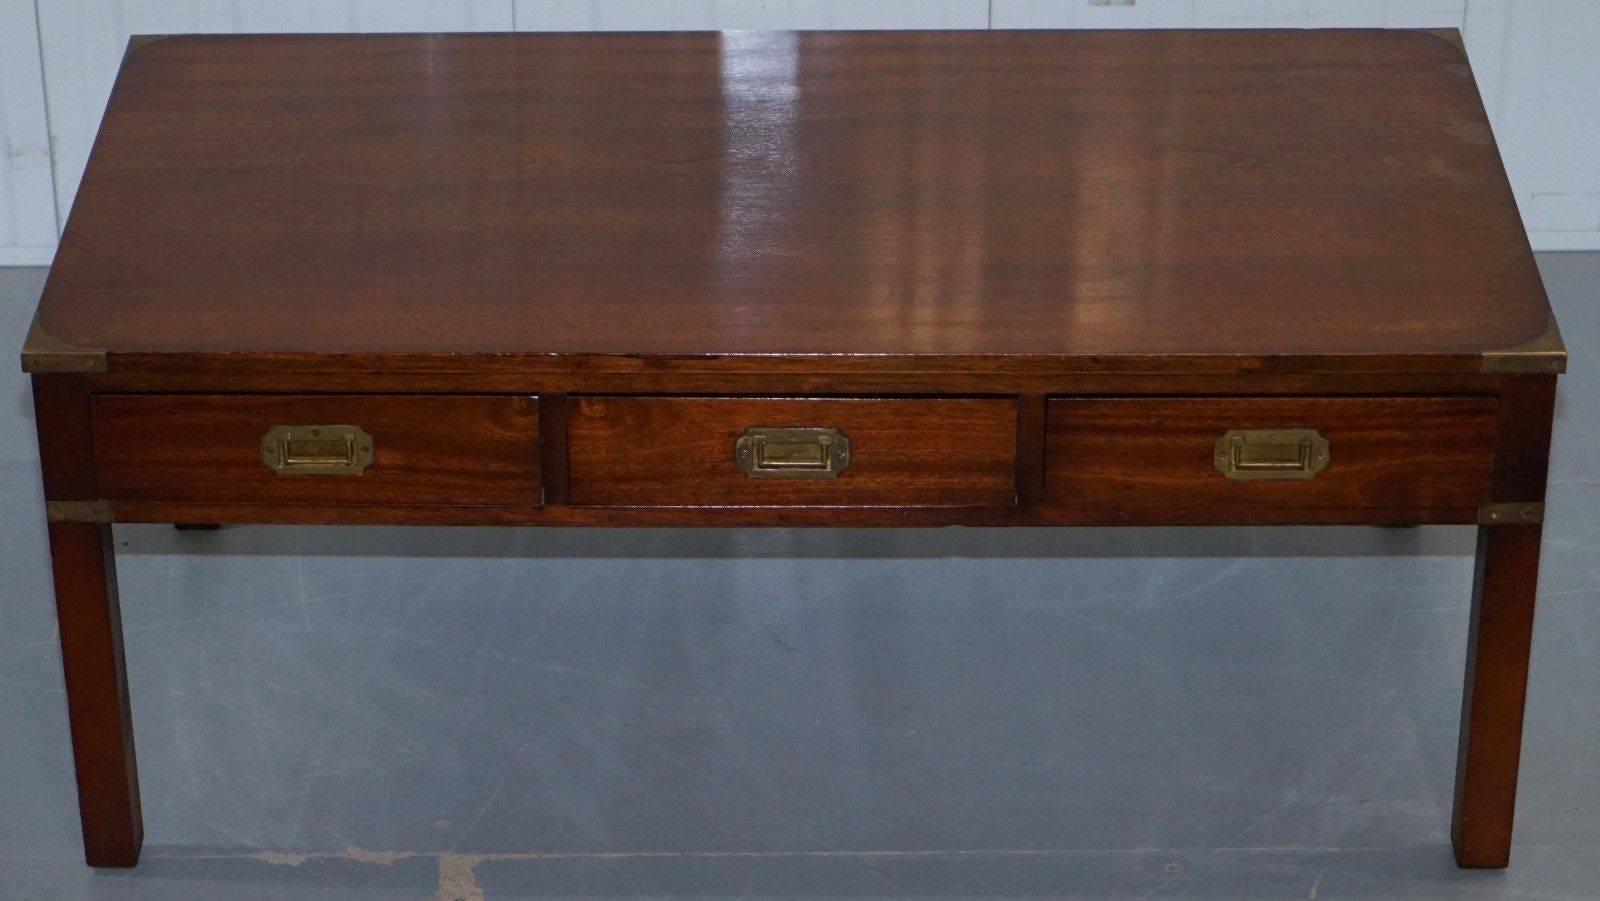 We are delighted to offer for sale this stunning Harrods London large mahogany military campaign coffee table brass handles

This table is in good vintage condition, it was purchased from Harrods London around 15 years ago, the top has normal